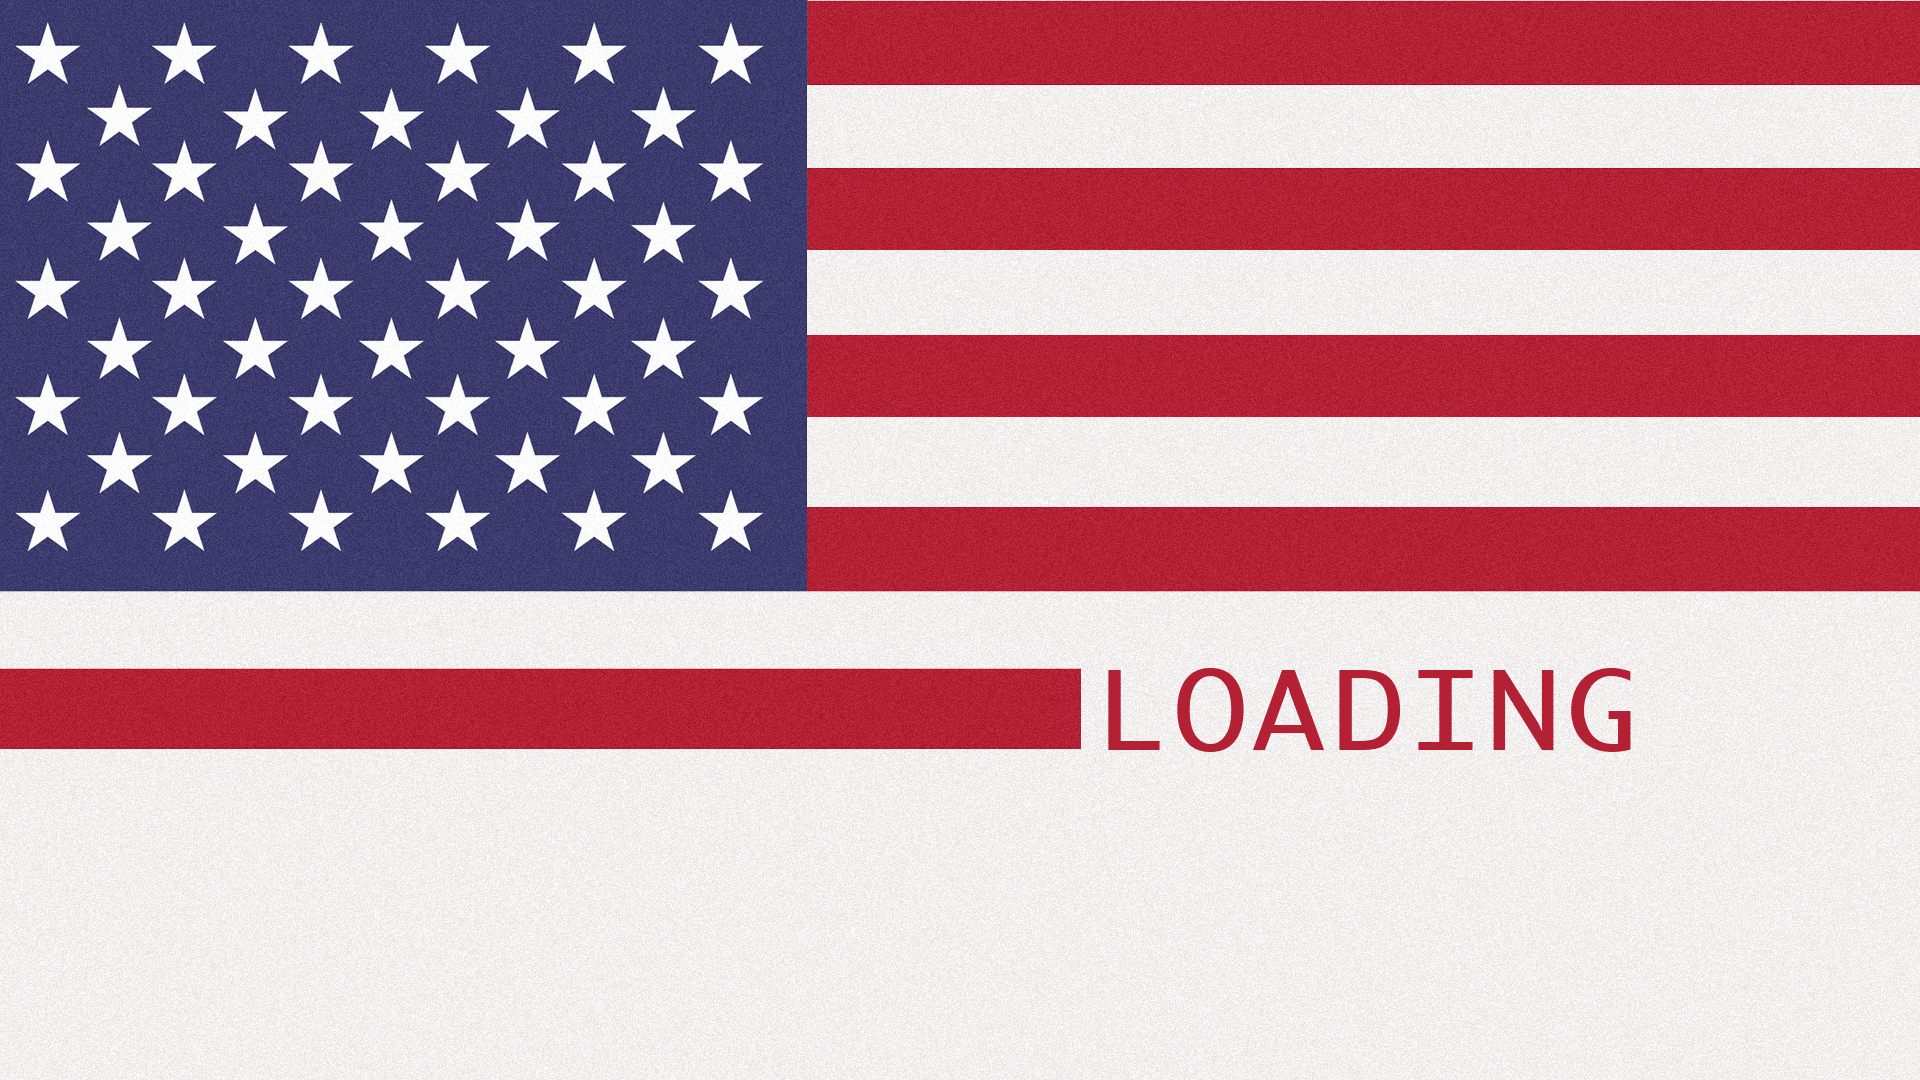 Animated gif of the American flag as a loading screen